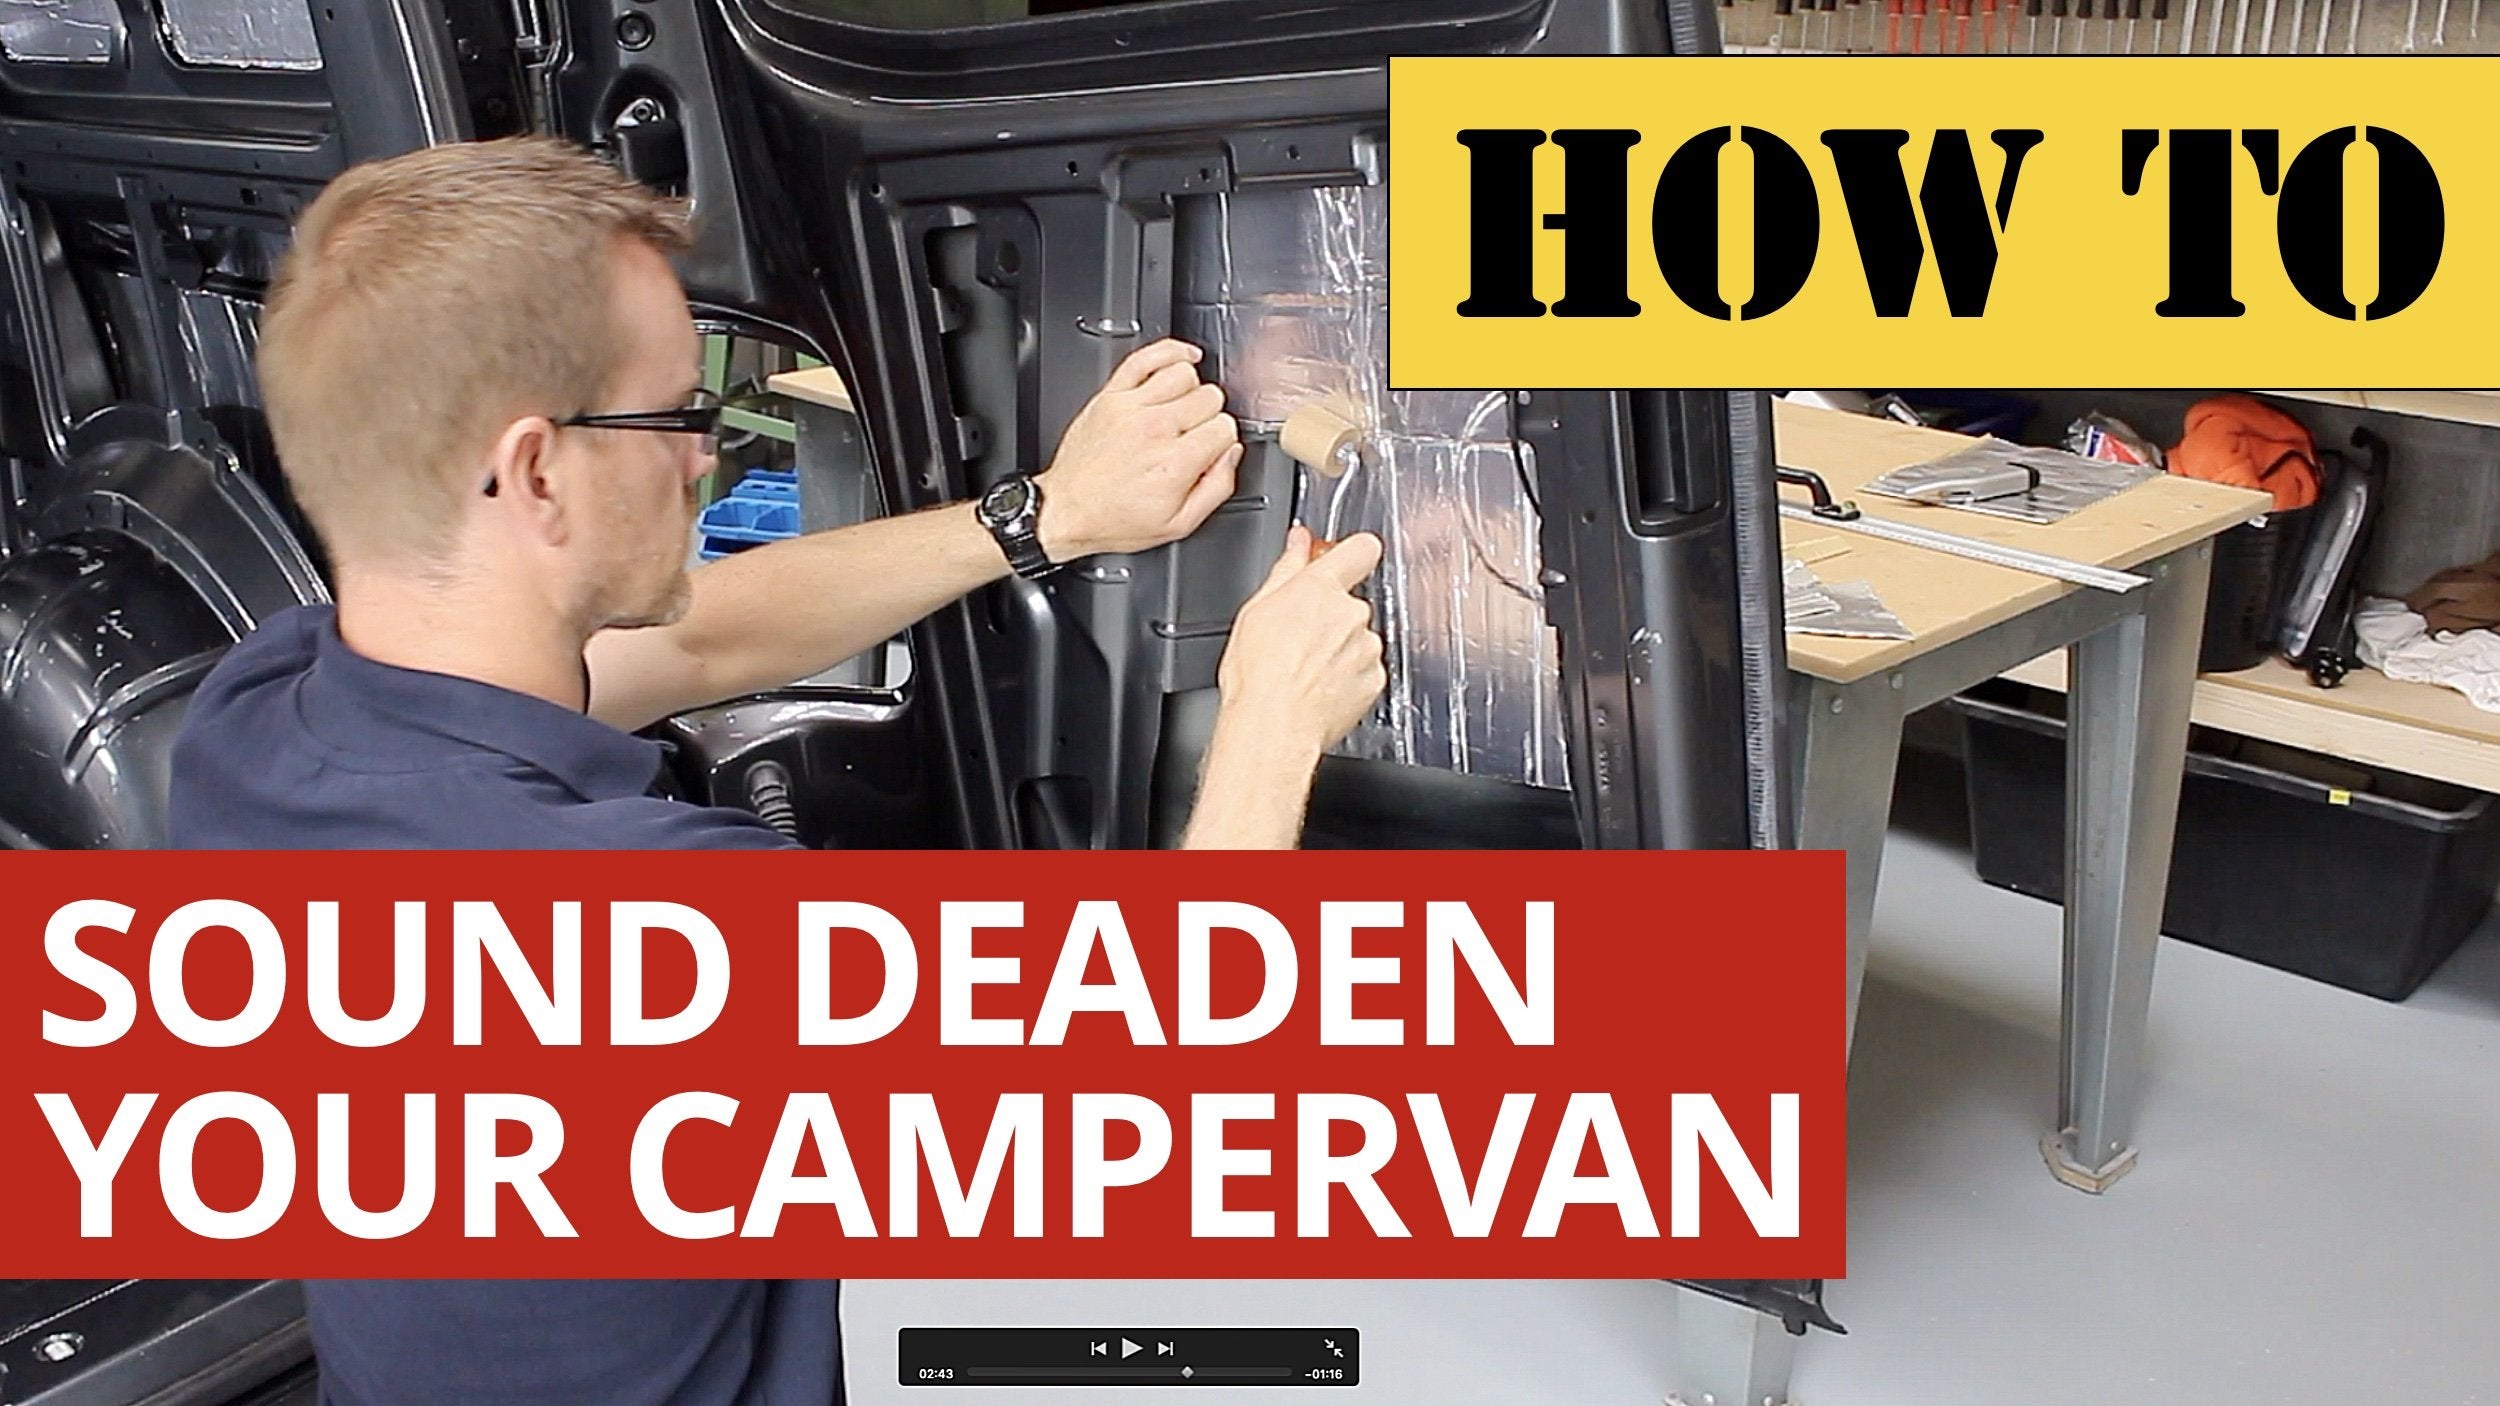 Video: How to Soundproof your Campervan with Kiravans Vibration Damping